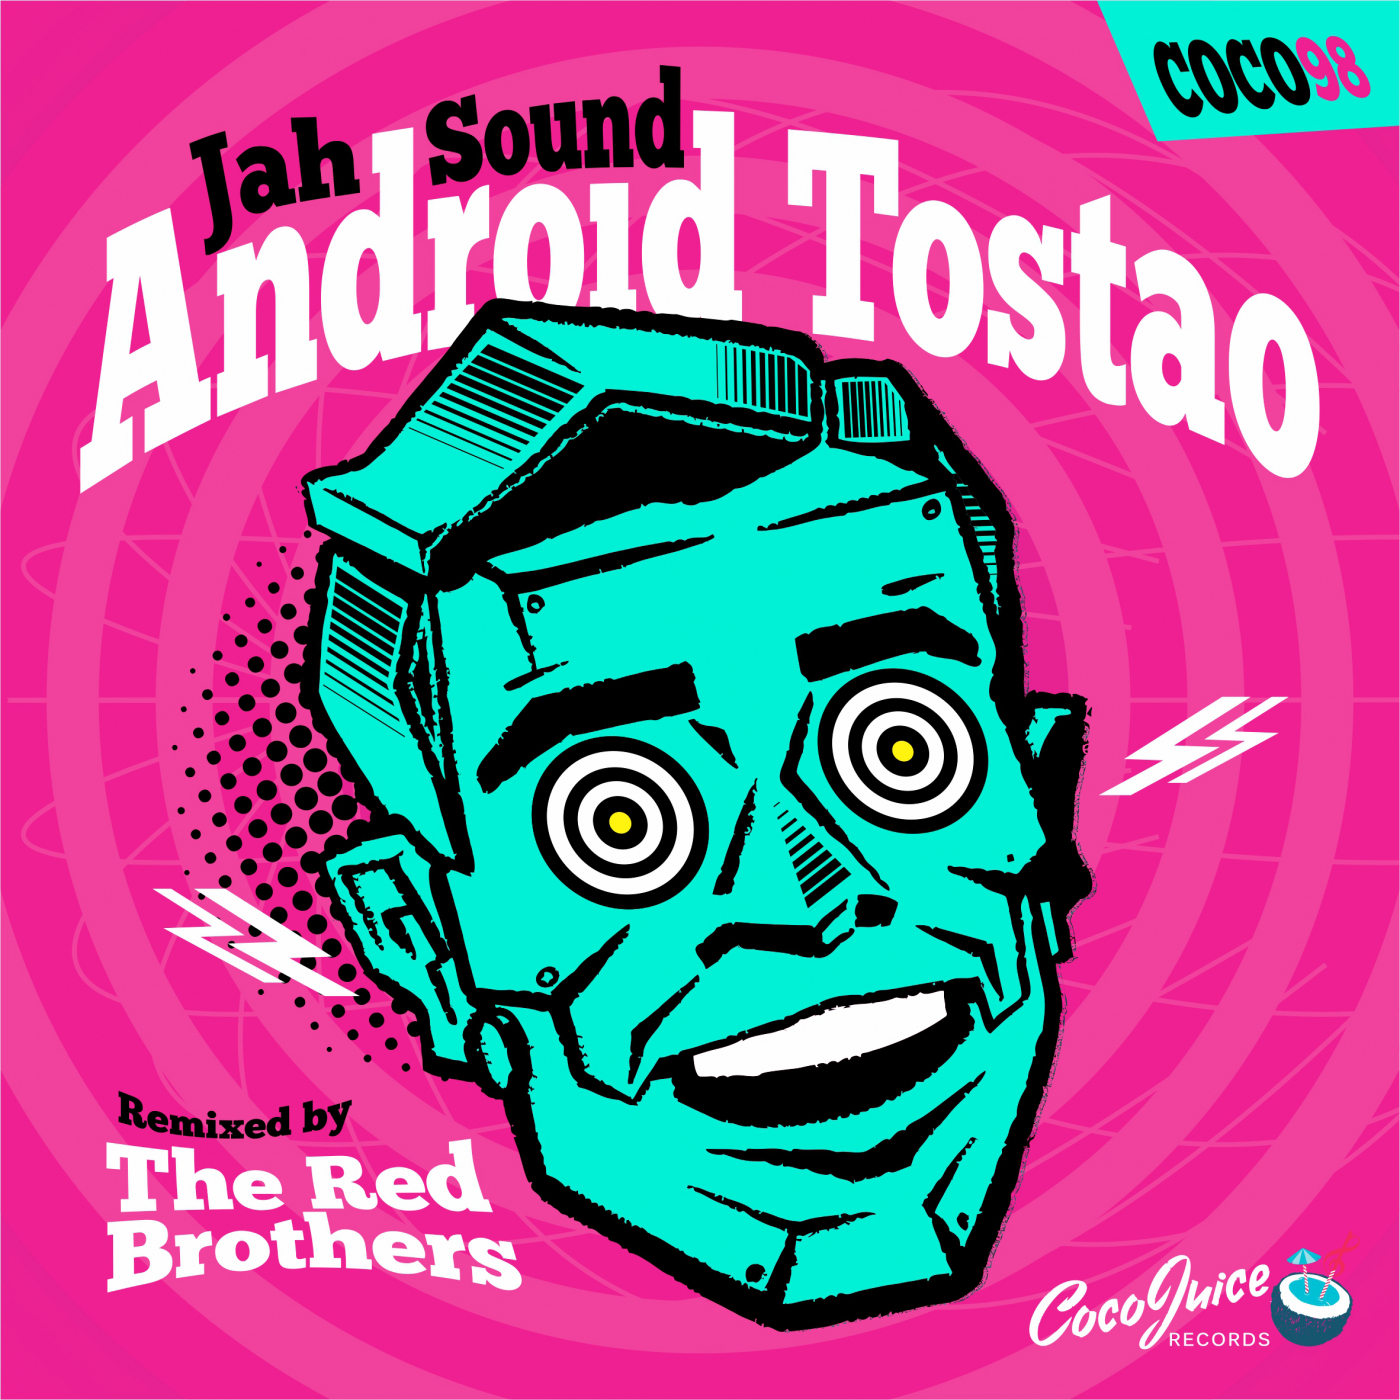 Jah Sound Android Tostao альбом. Jah Sound Android tostado альбом. Tostao Rosa. Red brothers